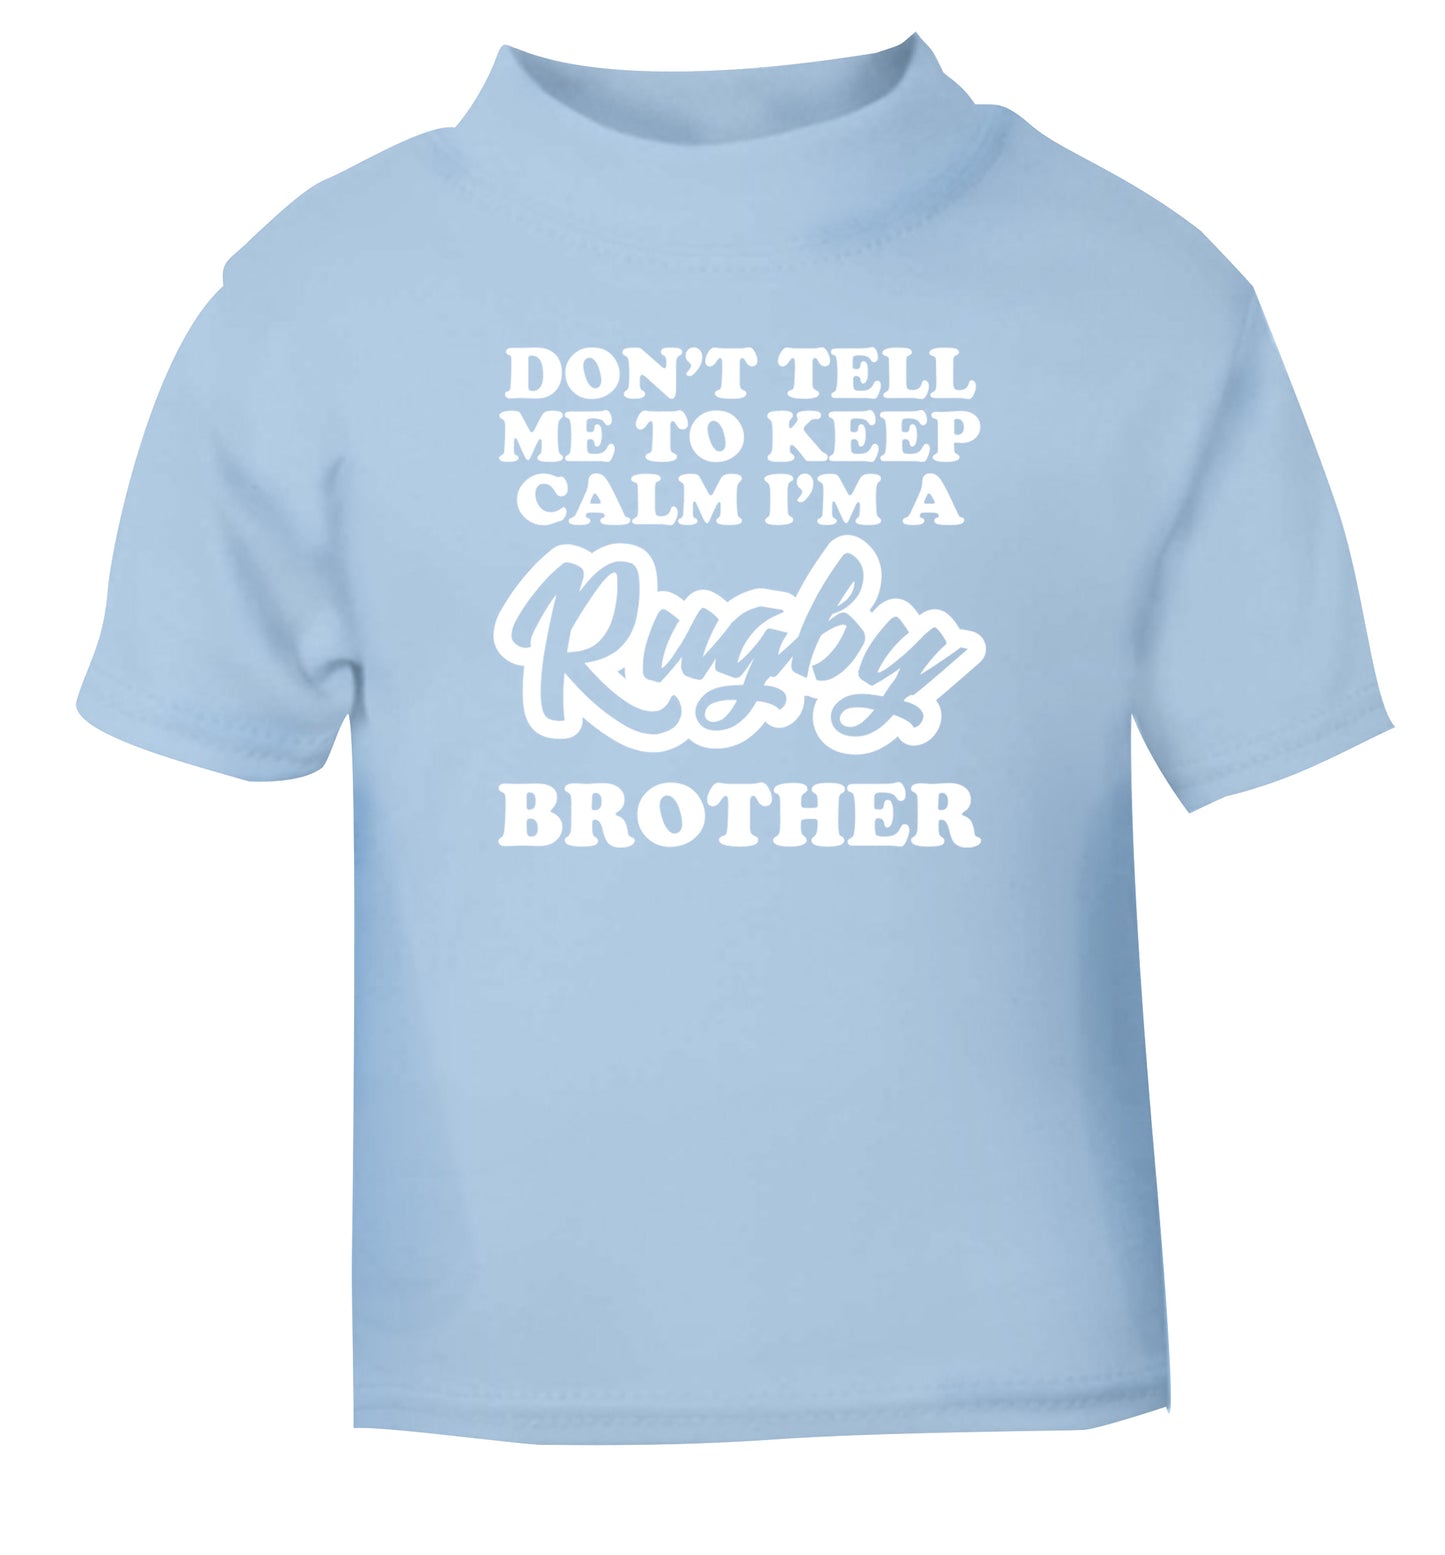 Don't tell me keep calm I'm a rugby brother light blue Baby Toddler Tshirt 2 Years